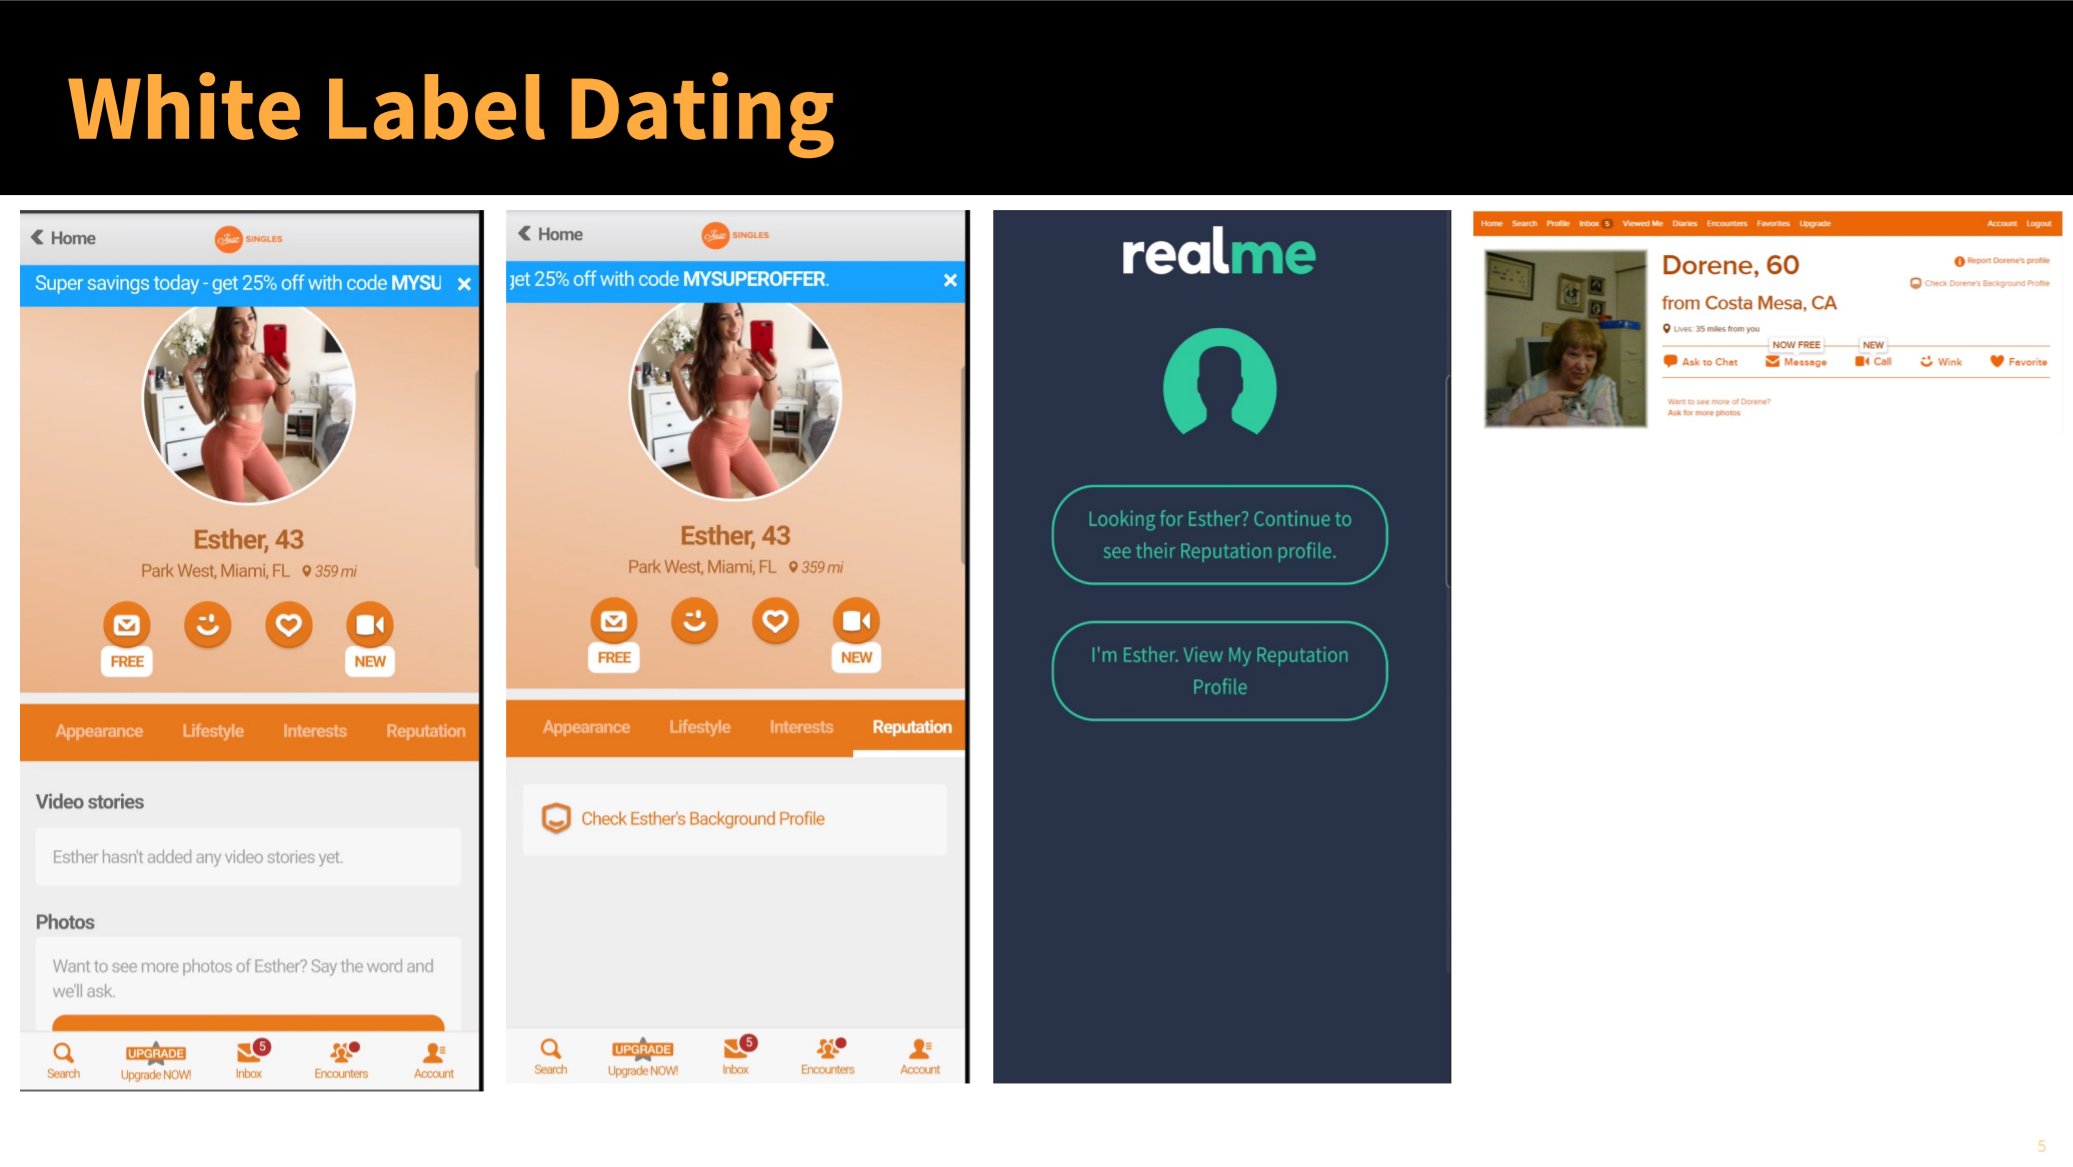 RealMe integration - checks for real users making dating apps more trusted